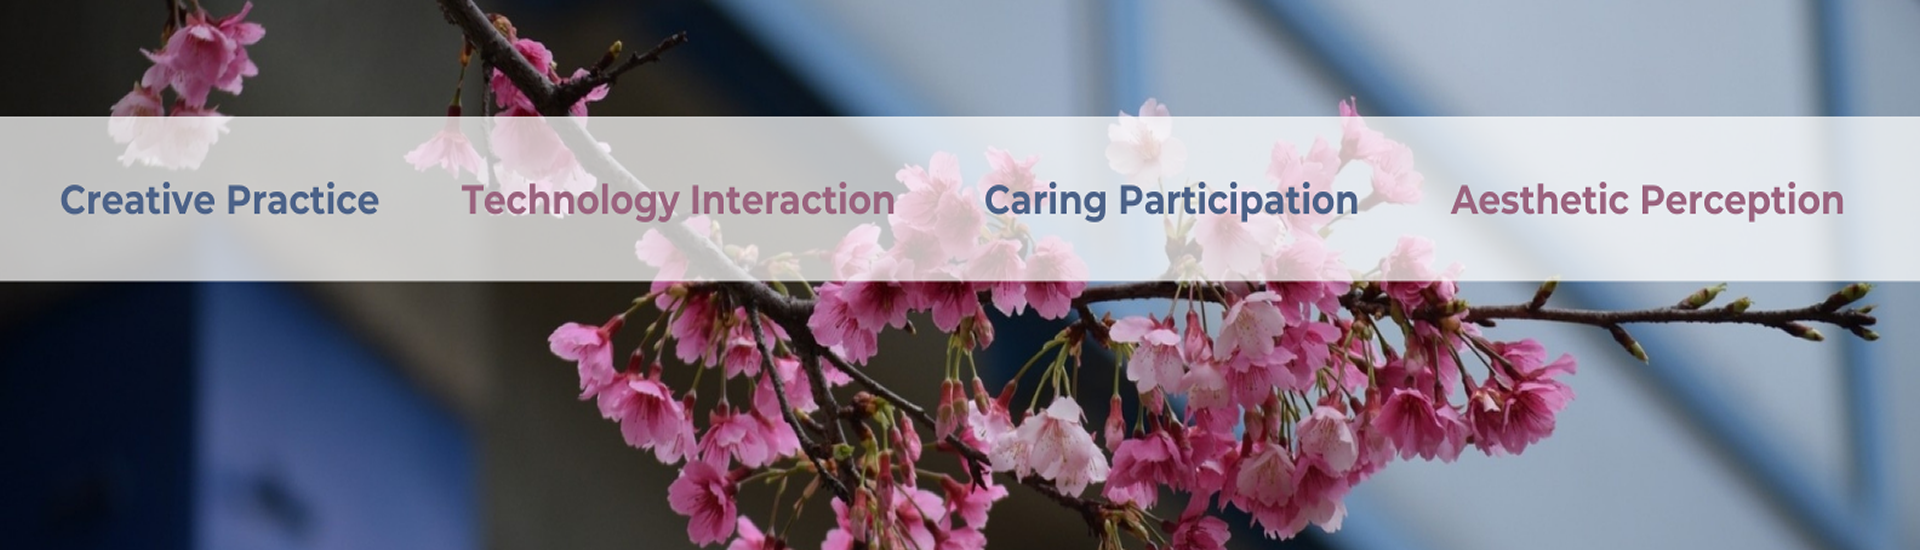 Creative Practice　Technology Interaction　Caring Participation Aesthetic Perception